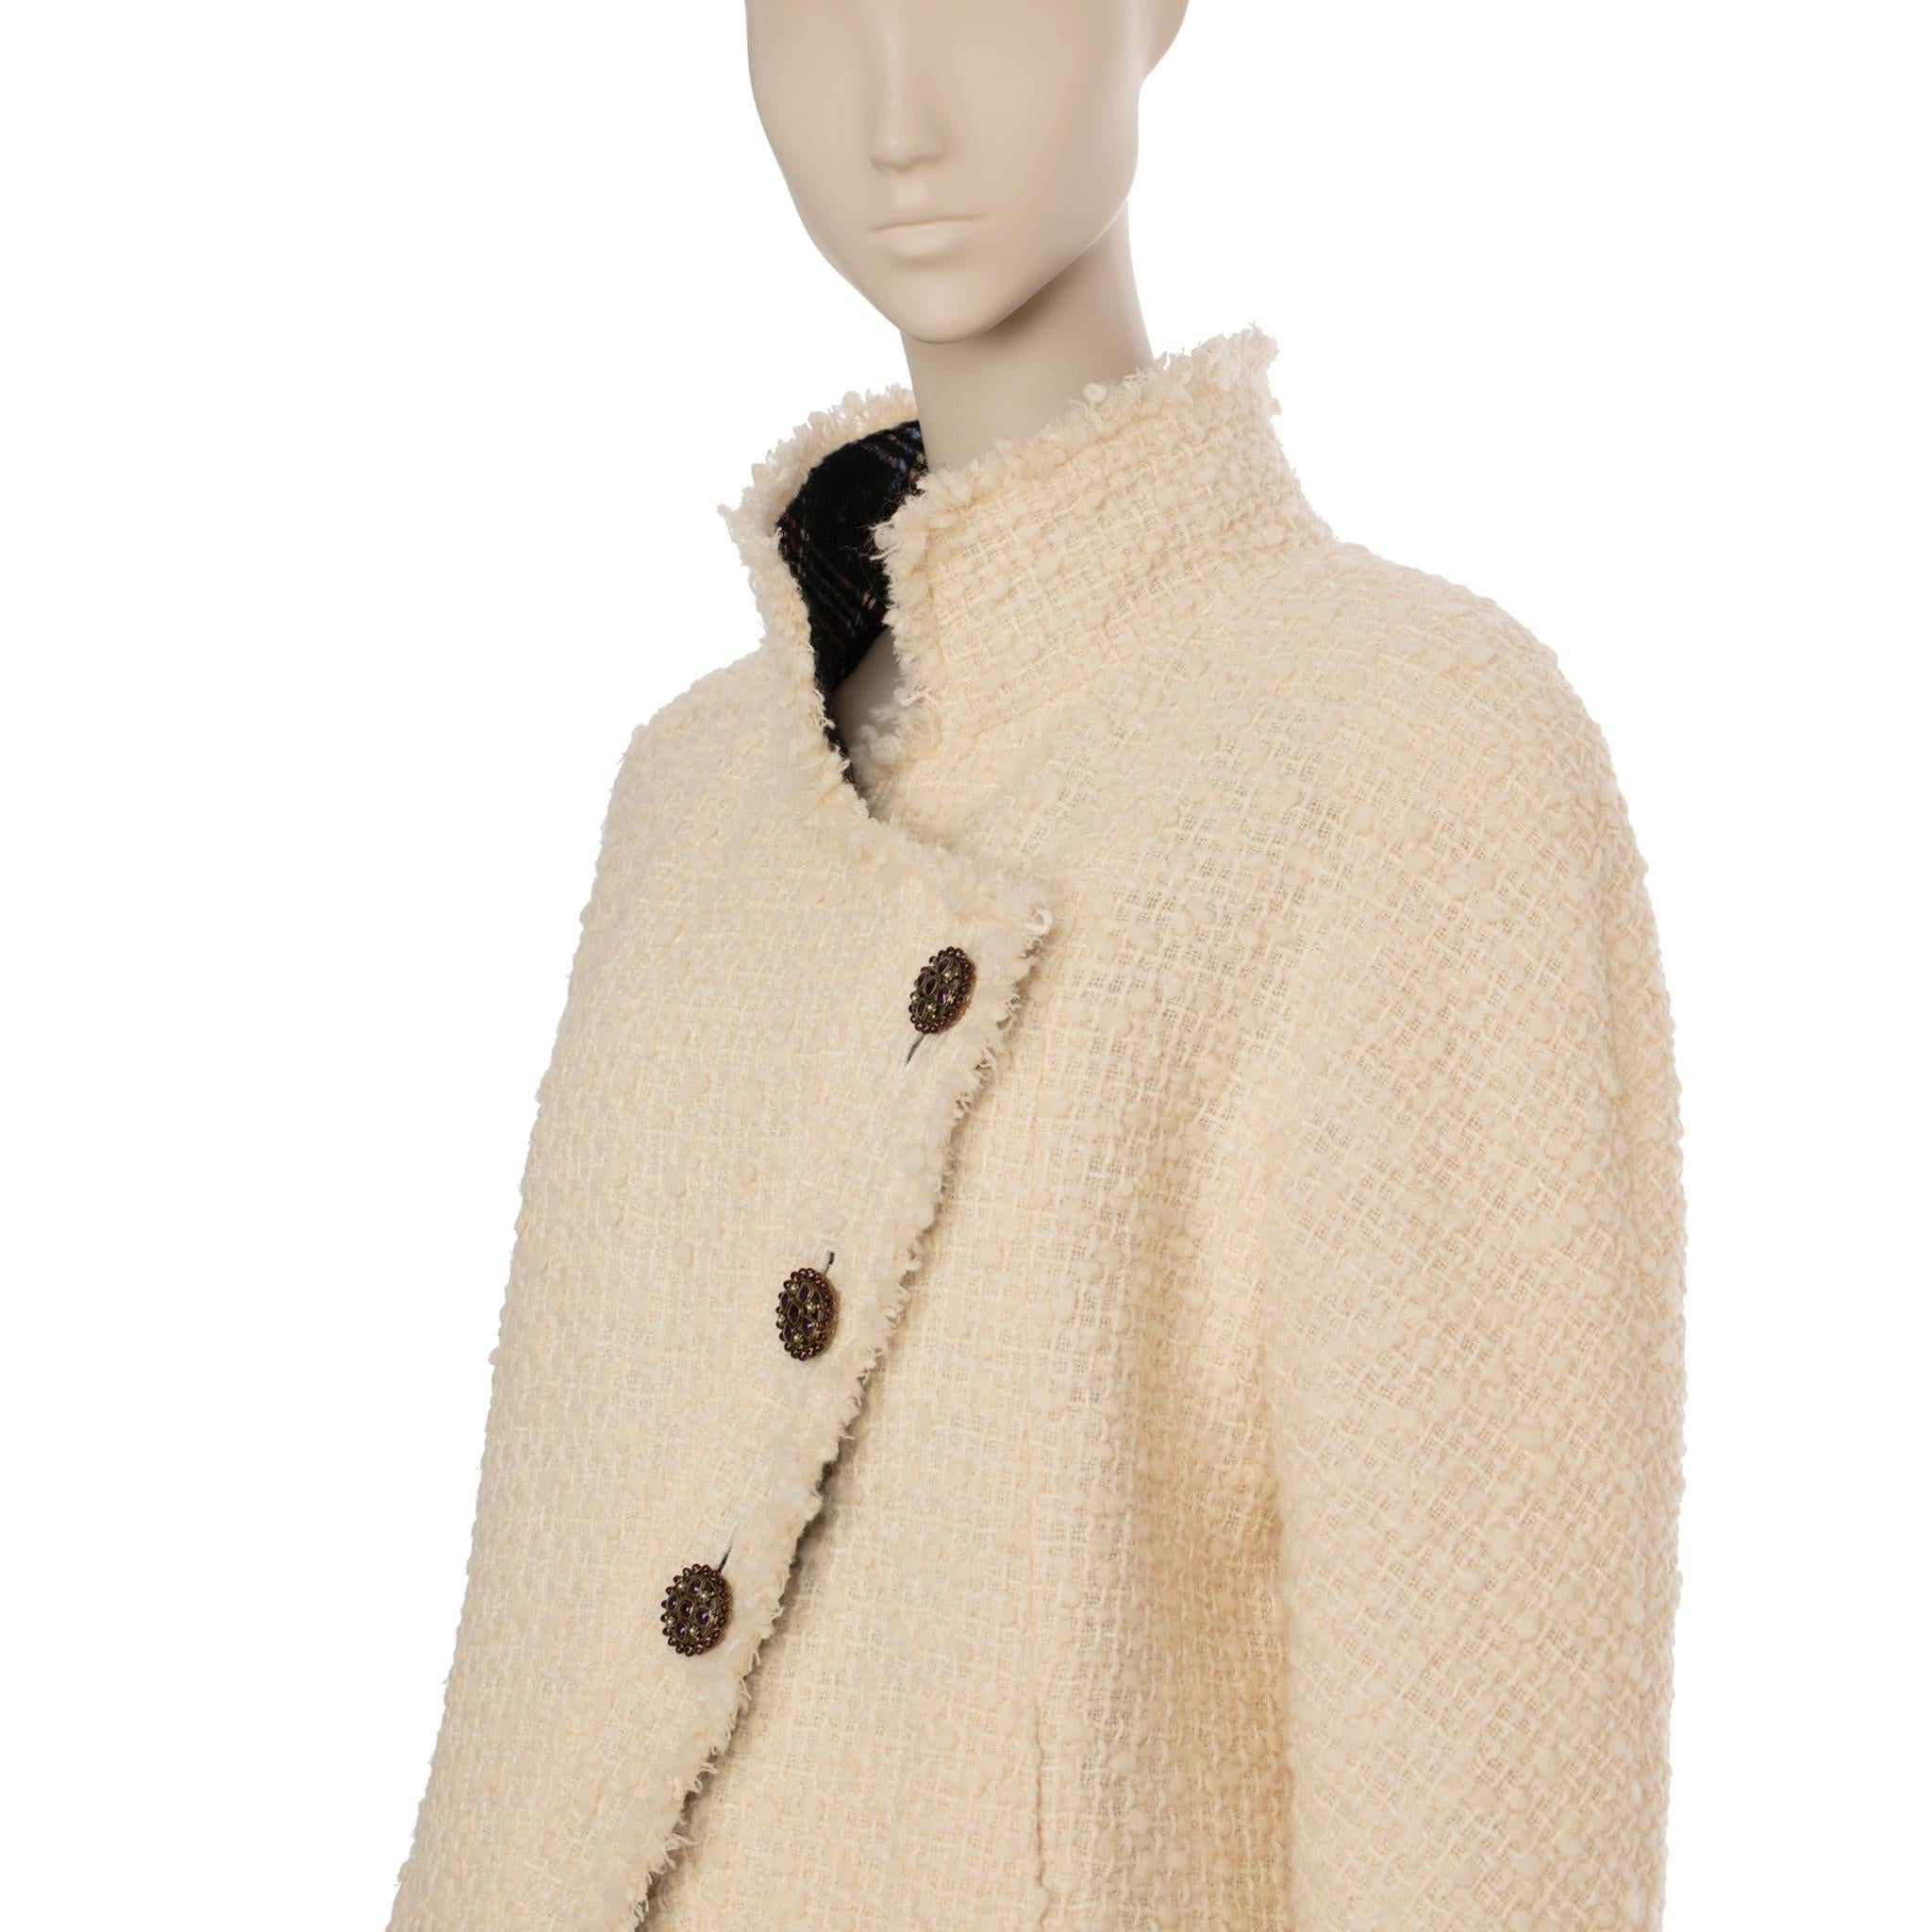 Chanel Cream Tweed Jacket With Plaid Lining 42 FR In Excellent Condition For Sale In DOUBLE BAY, NSW